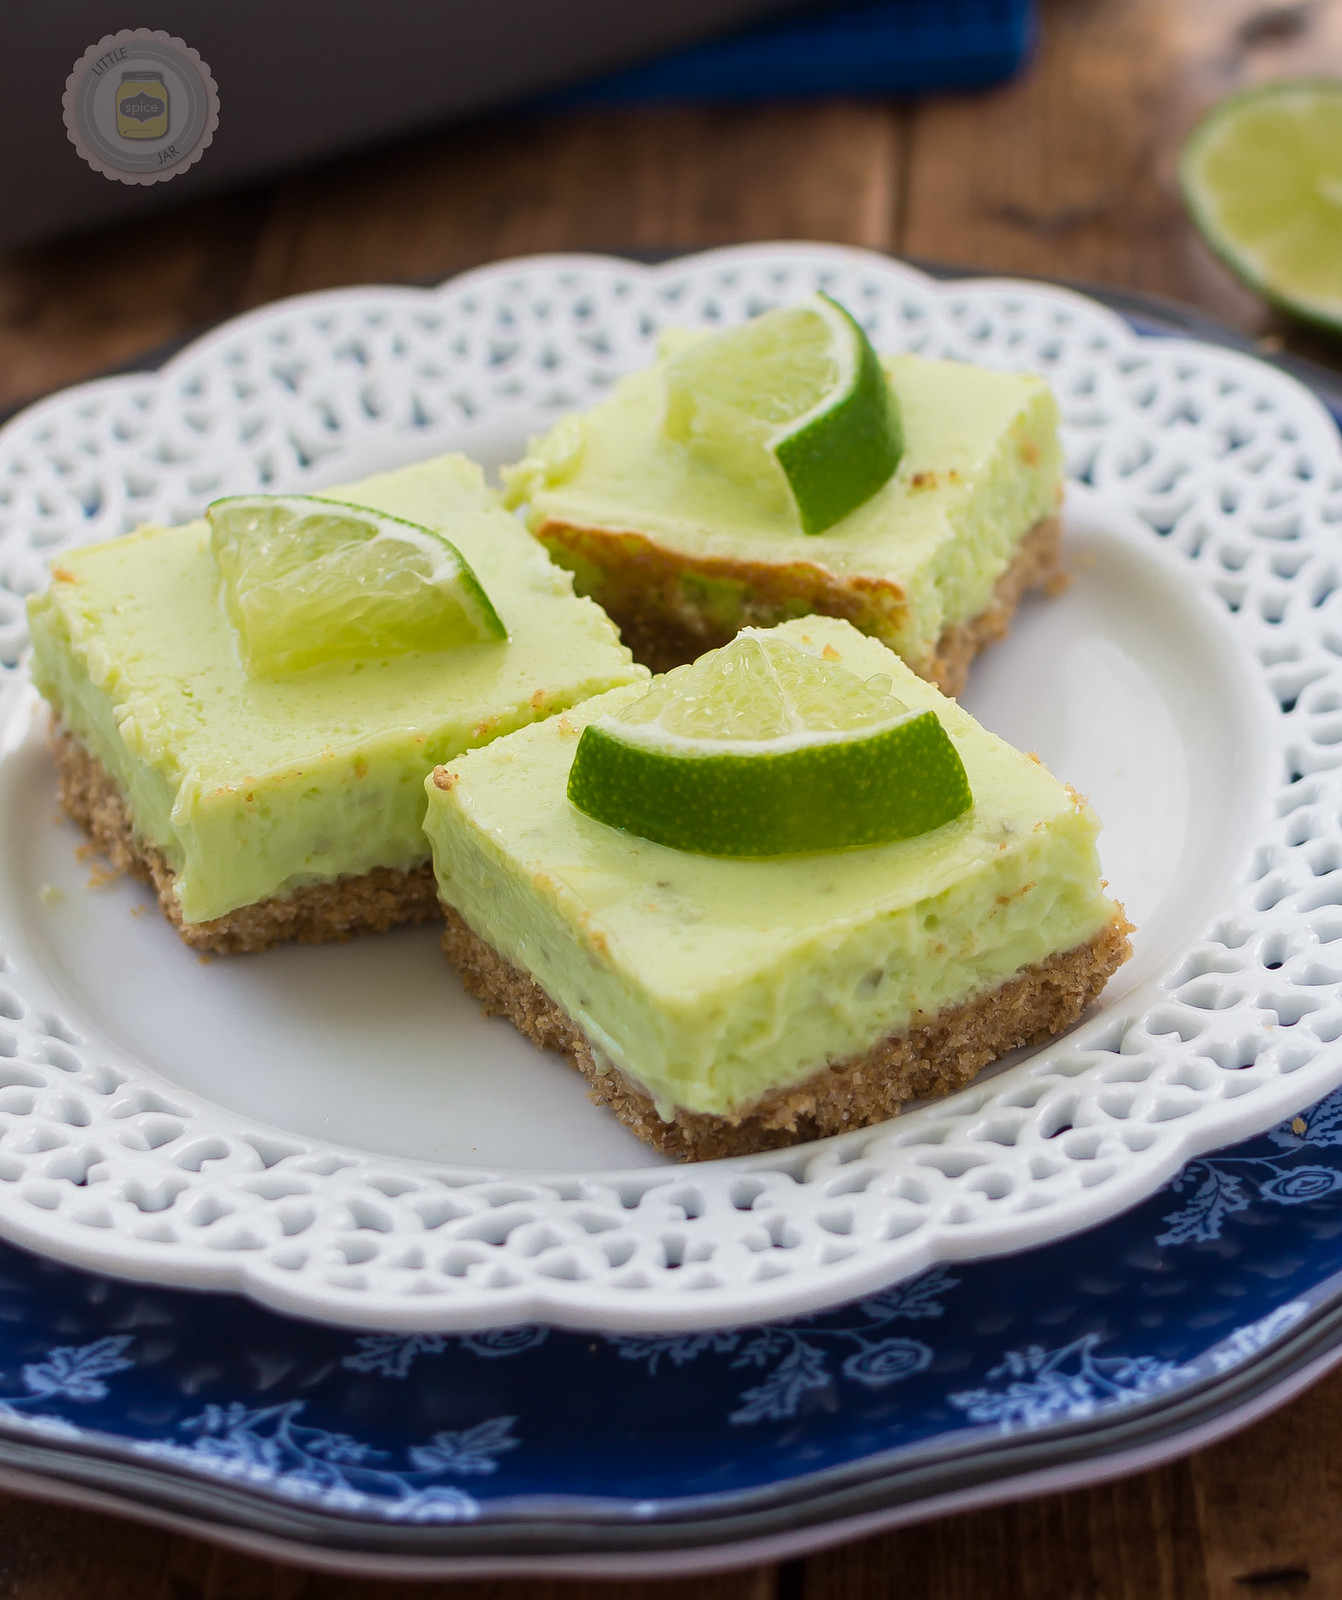 stacked plates with key lime pie squares resting on doily plate